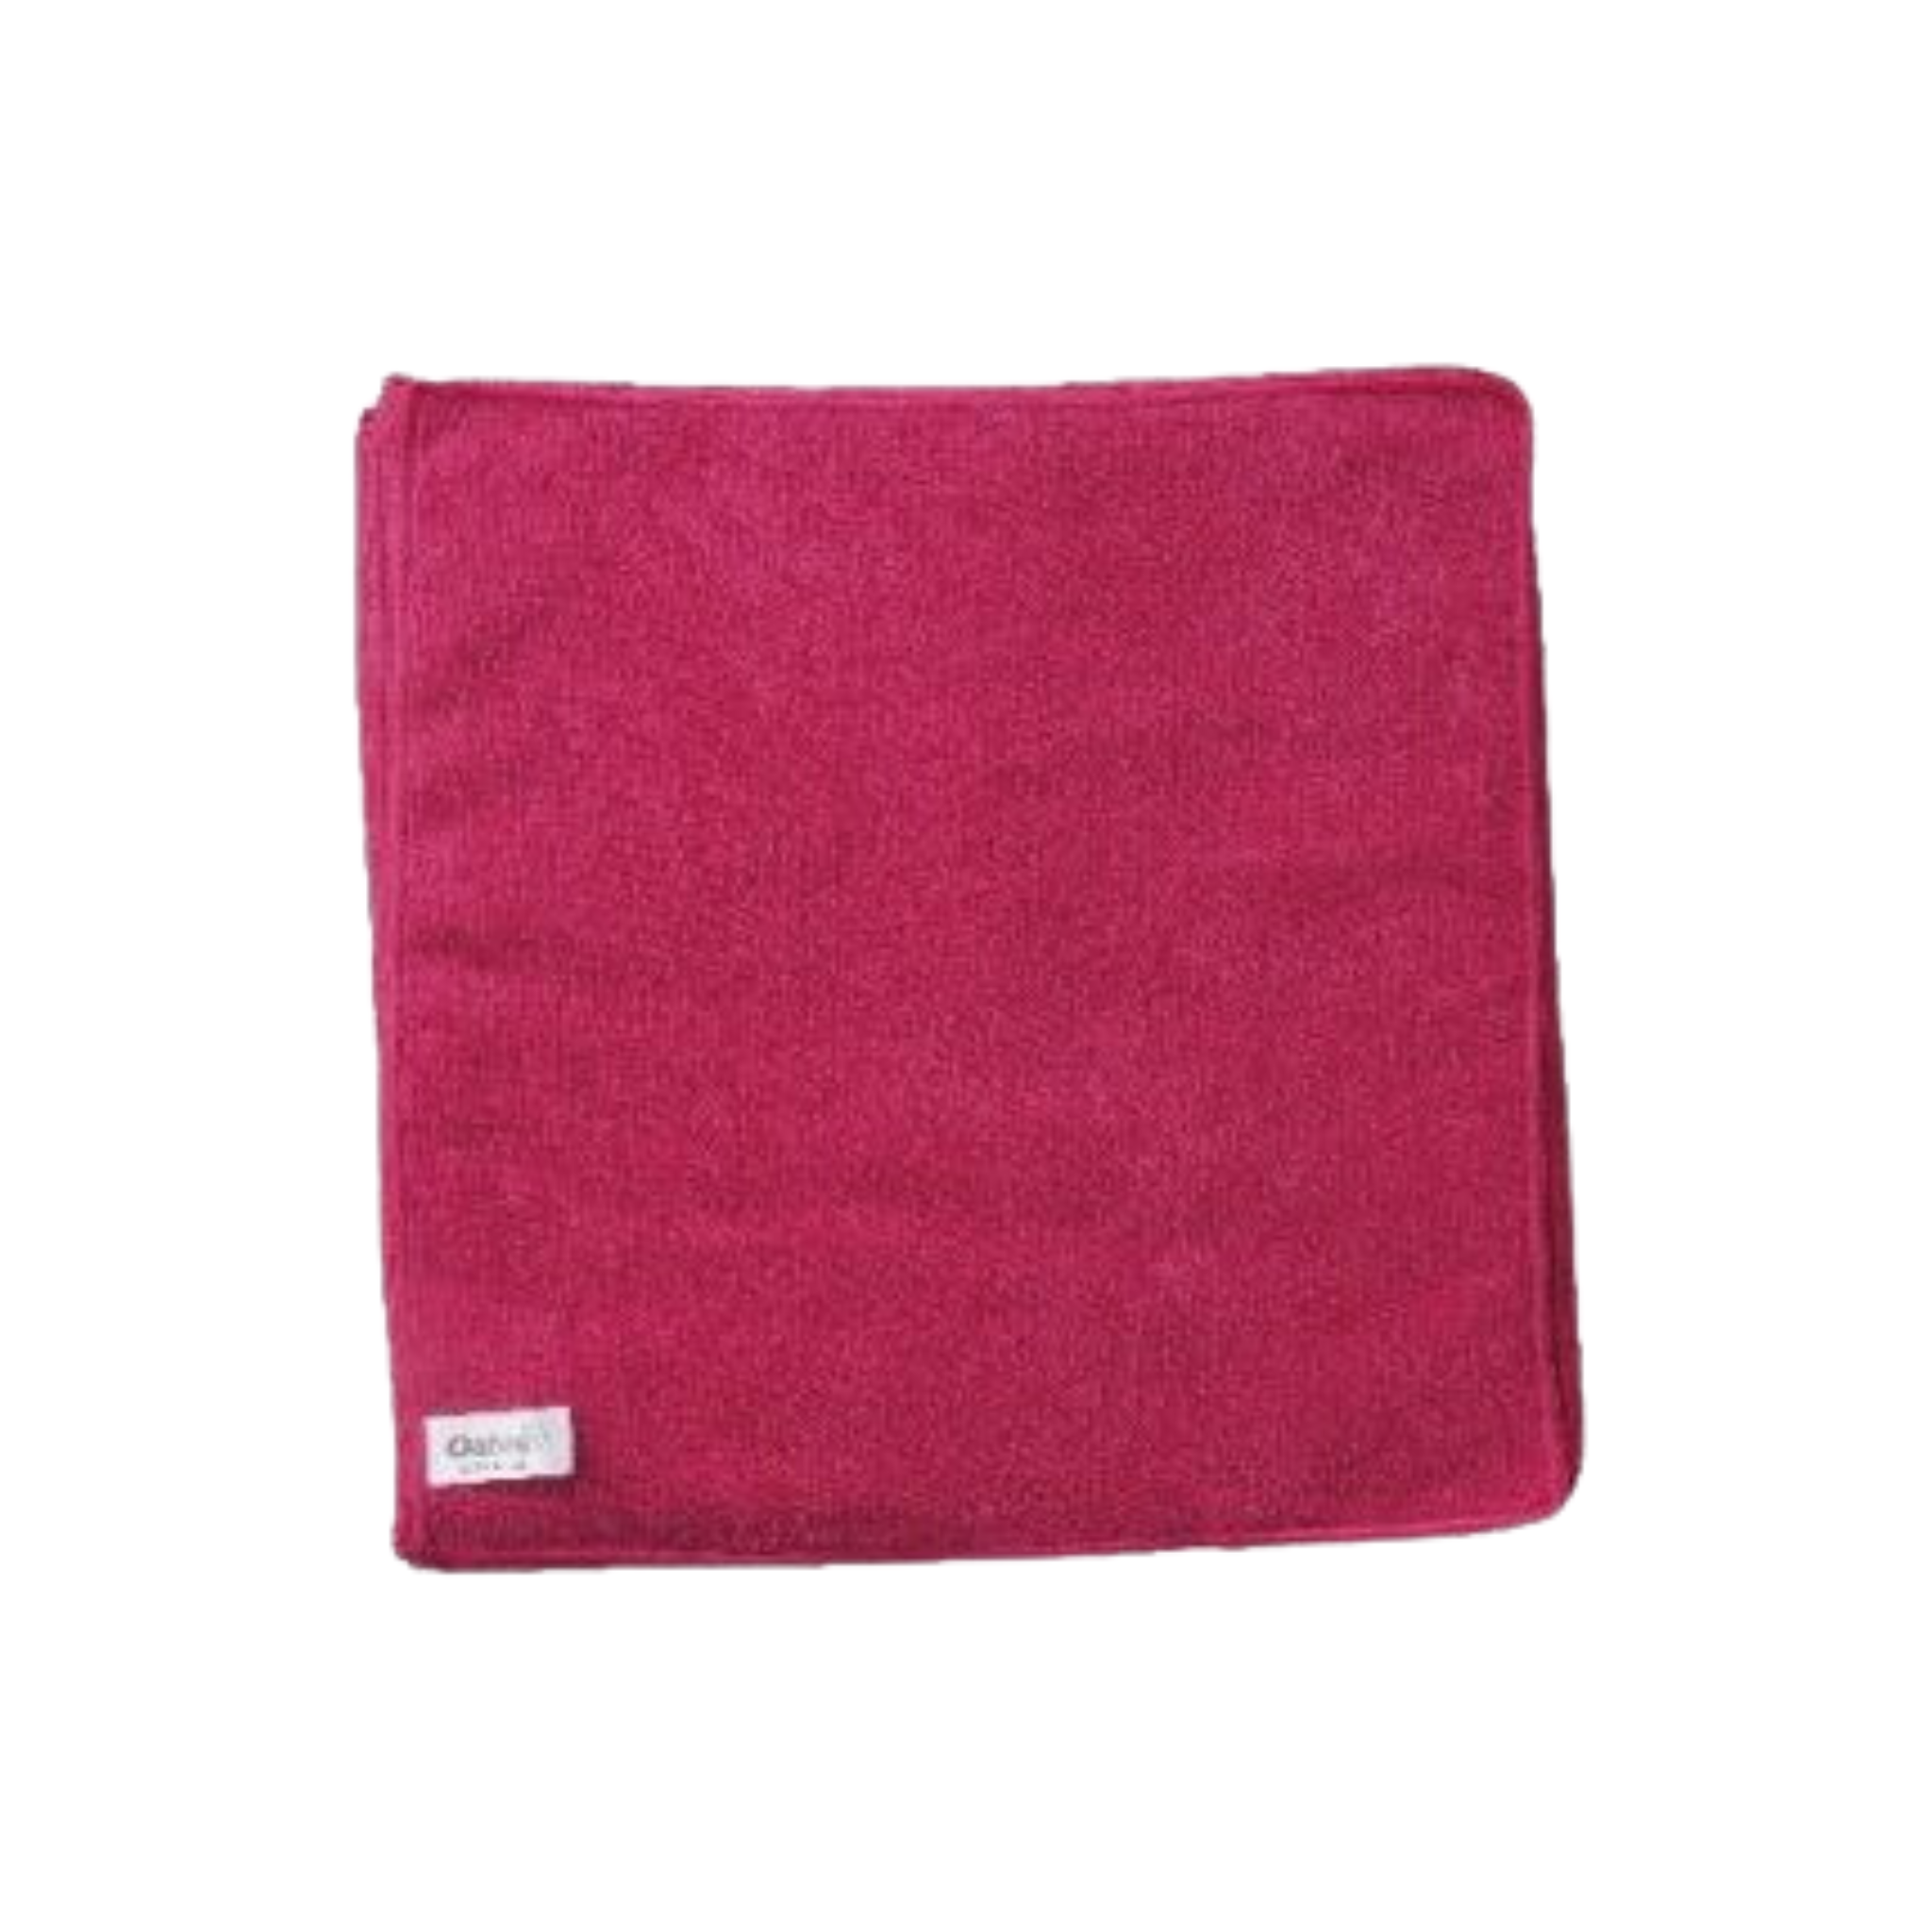 Oates Microfibre Cloths 10 Pack - Red